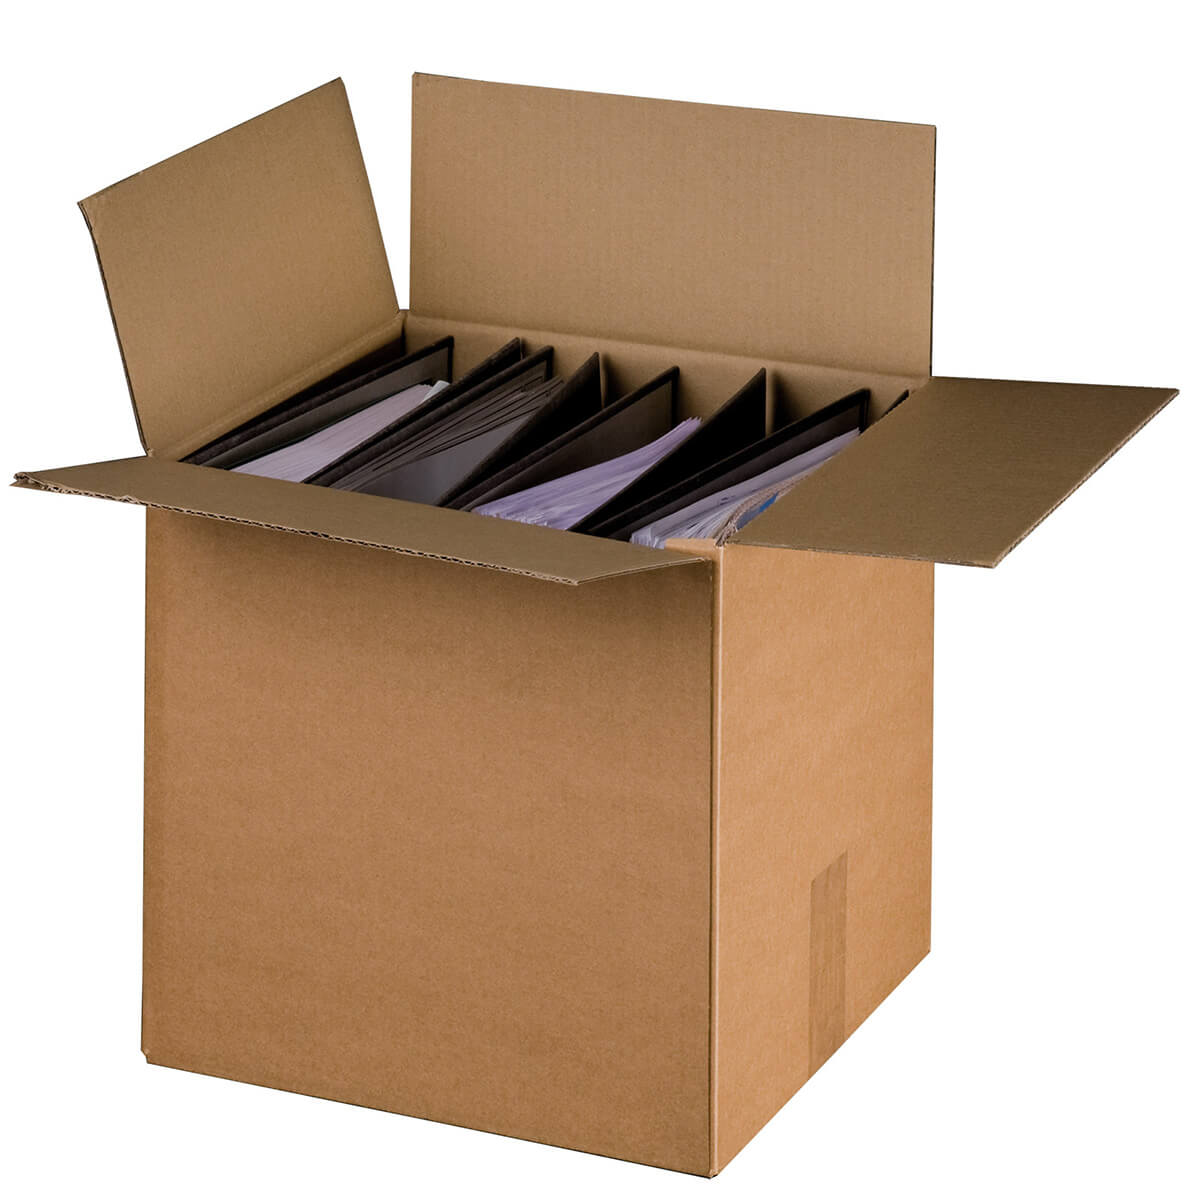 Shipping box for 4-5 document files